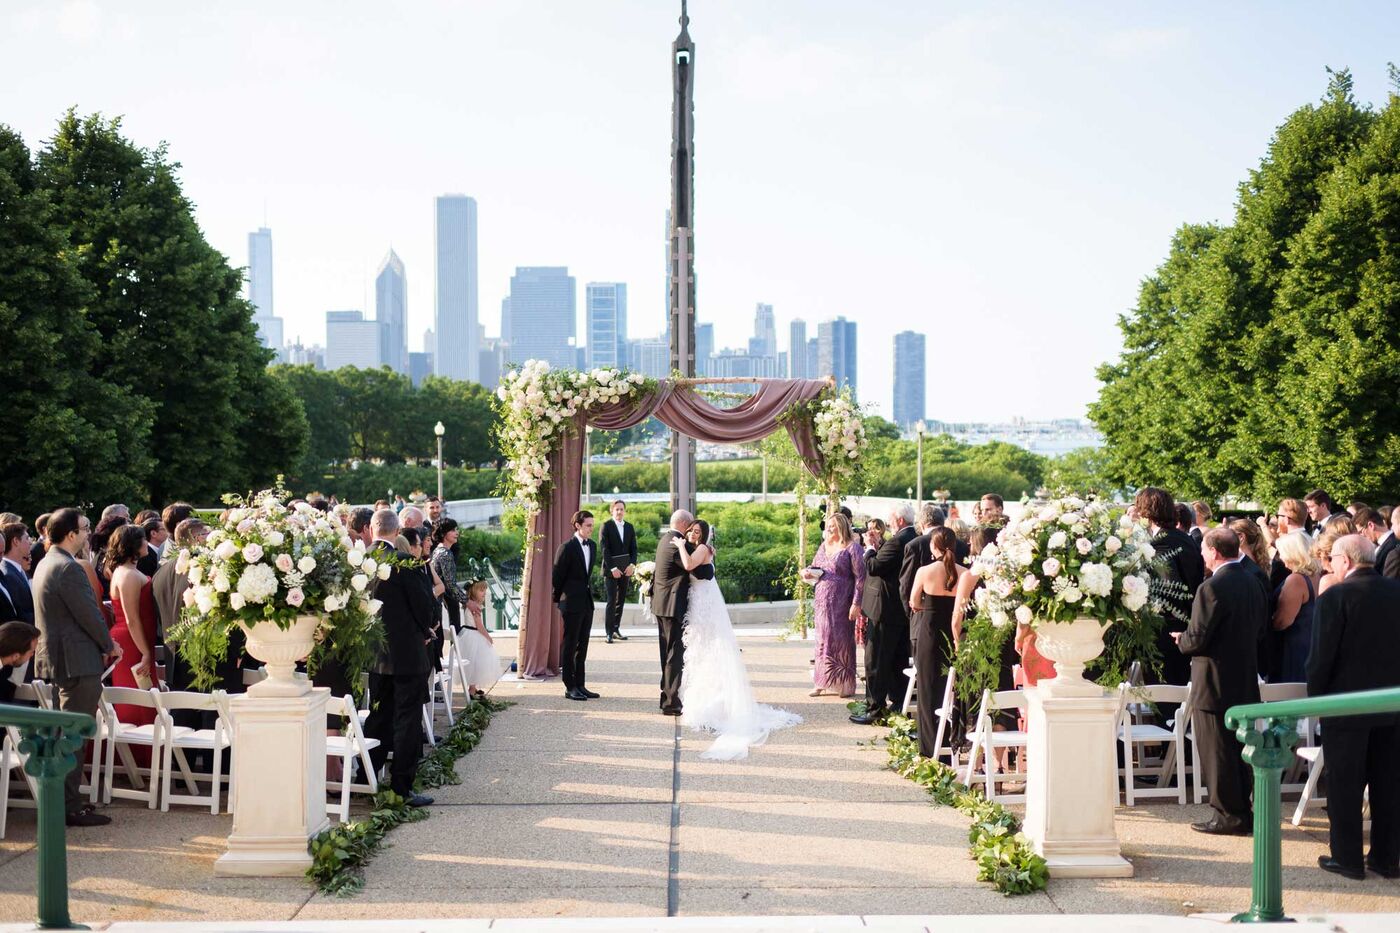 Museum Campus offers panoramic views of the Chicago skyline and Lake Michigan for your ceremony, al fresco cocktails, and unforgettable photos.